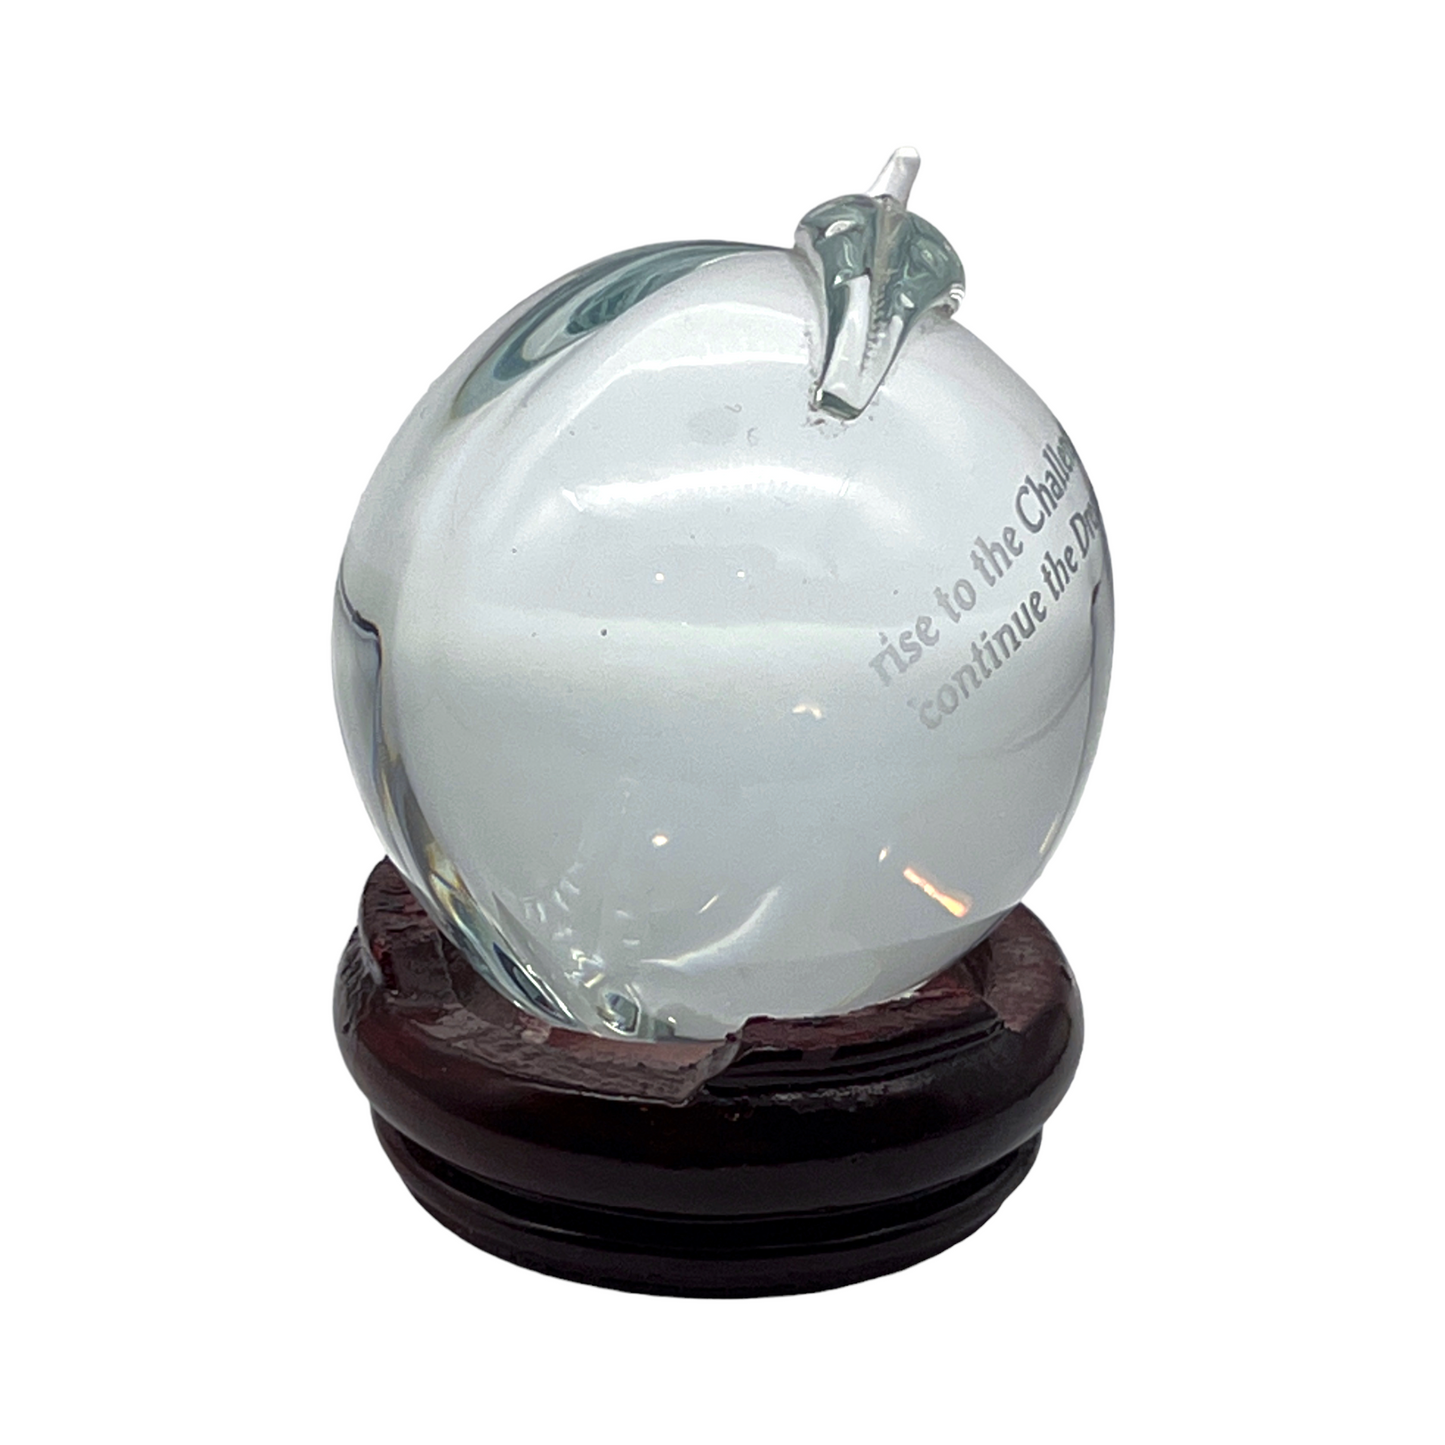 Dream Weaver - Handcrafted Art Glass Apple Paperweight - Signed - 4"